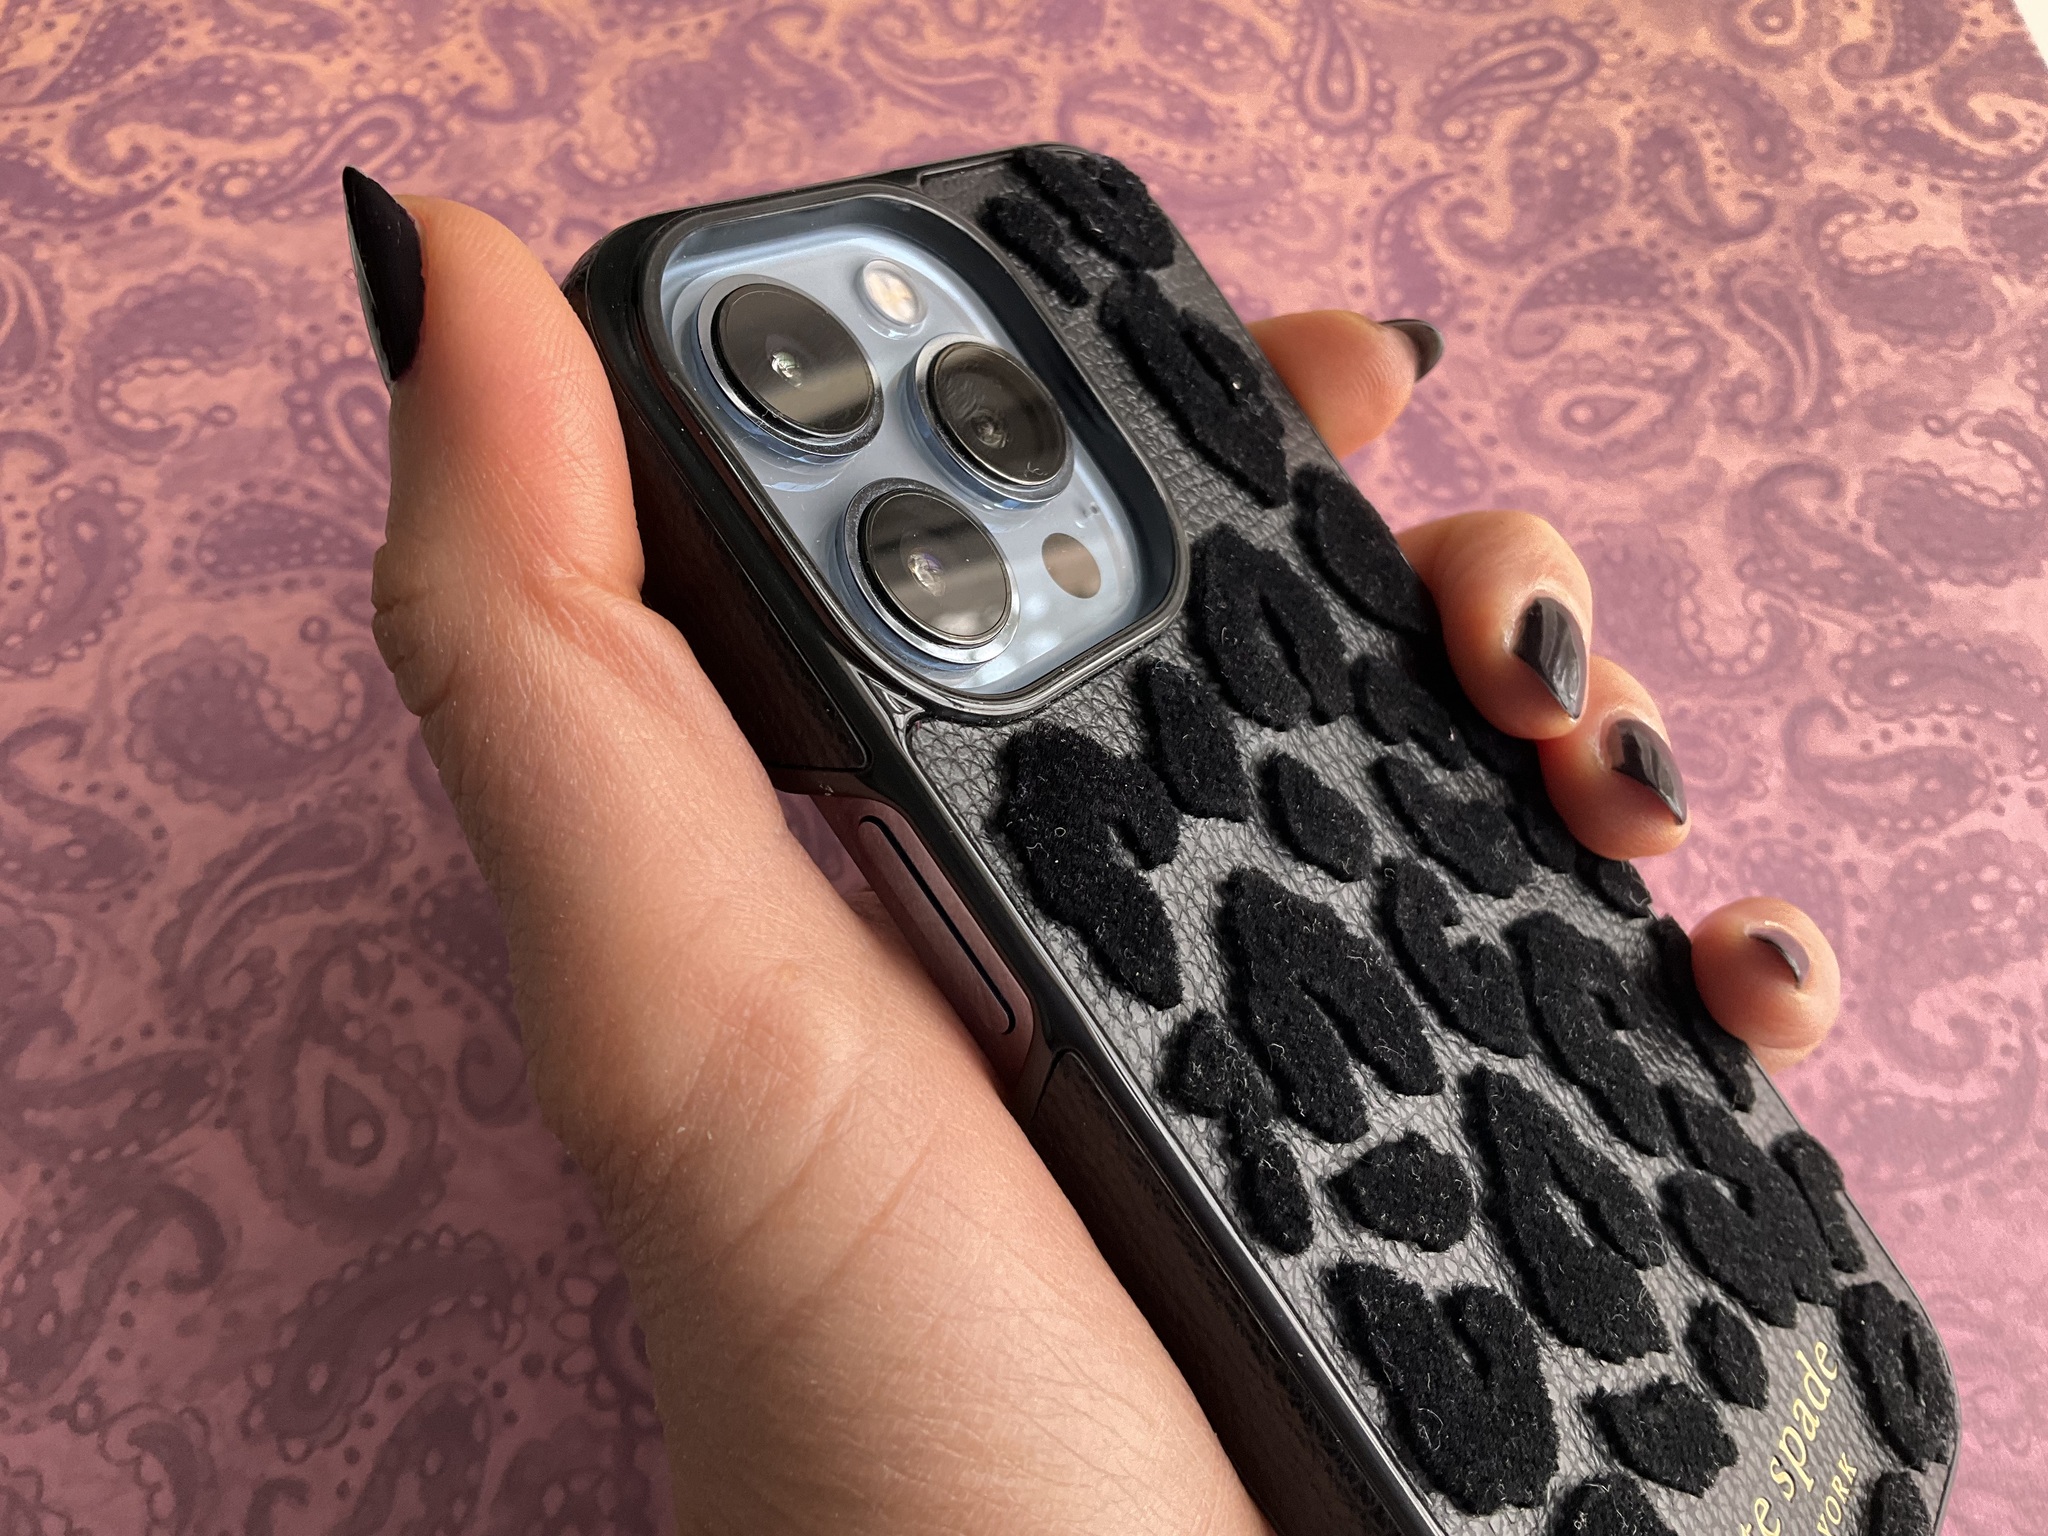 Kate Spade New York Wrap Case For Iphone Leopard Flocked Black Lifestyle In Hand Close Up